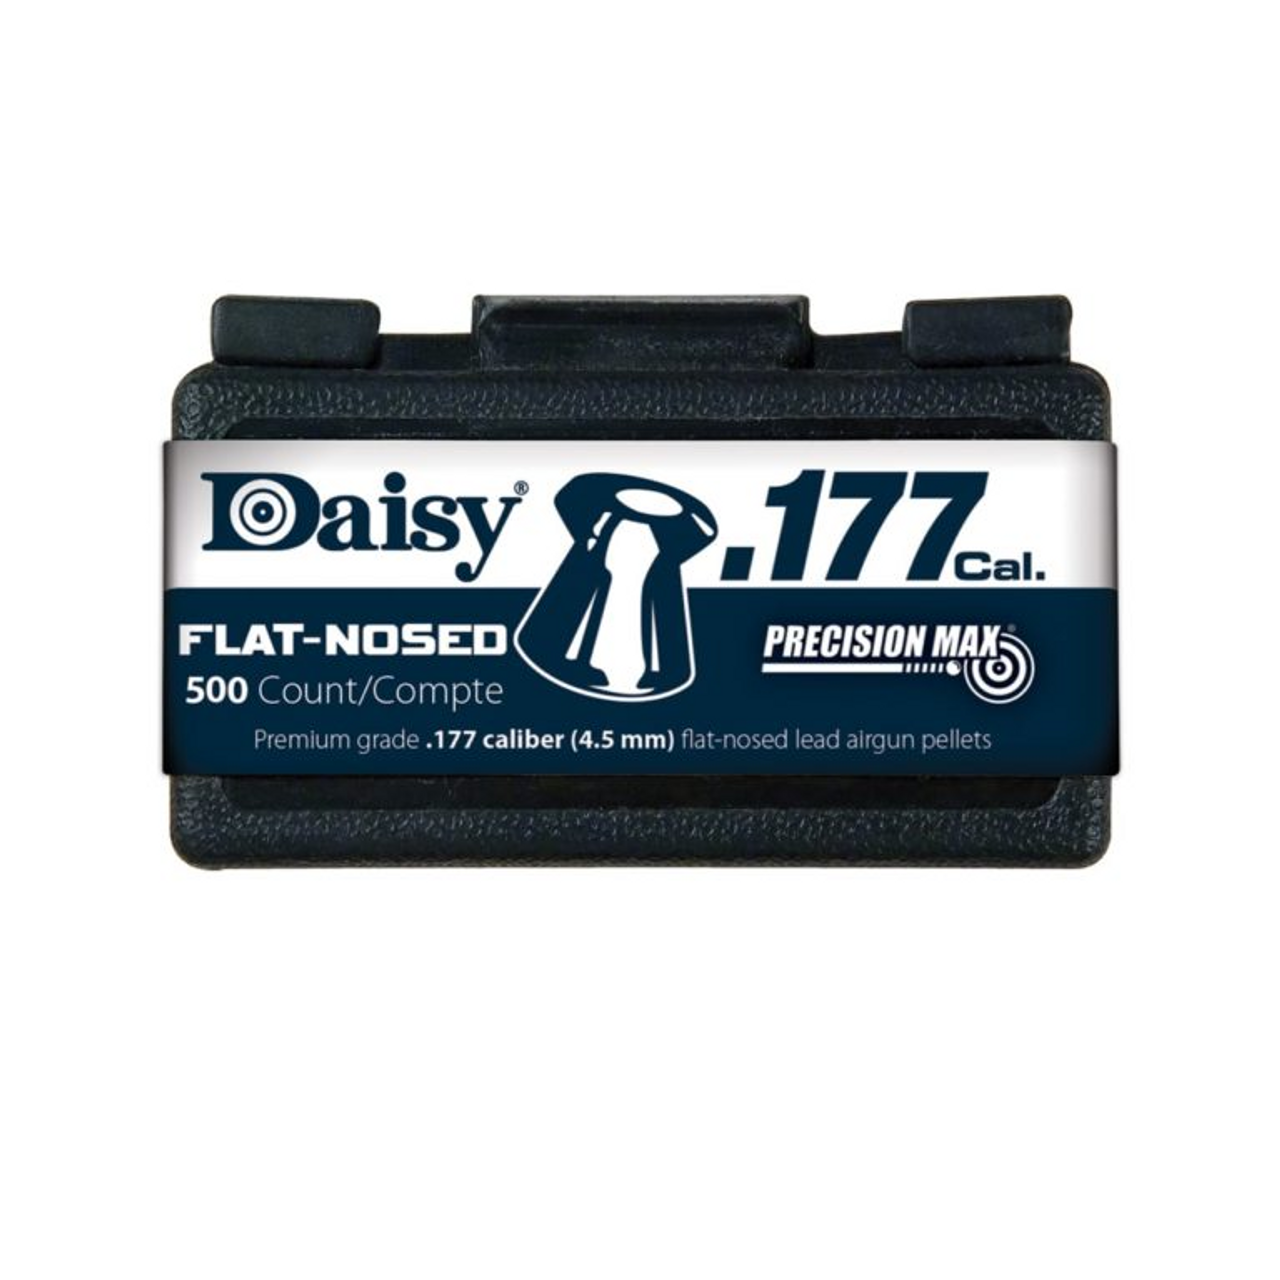 Daisy PrecisionMax .177 Cal. Flat Nosed Pellets, 500 Count